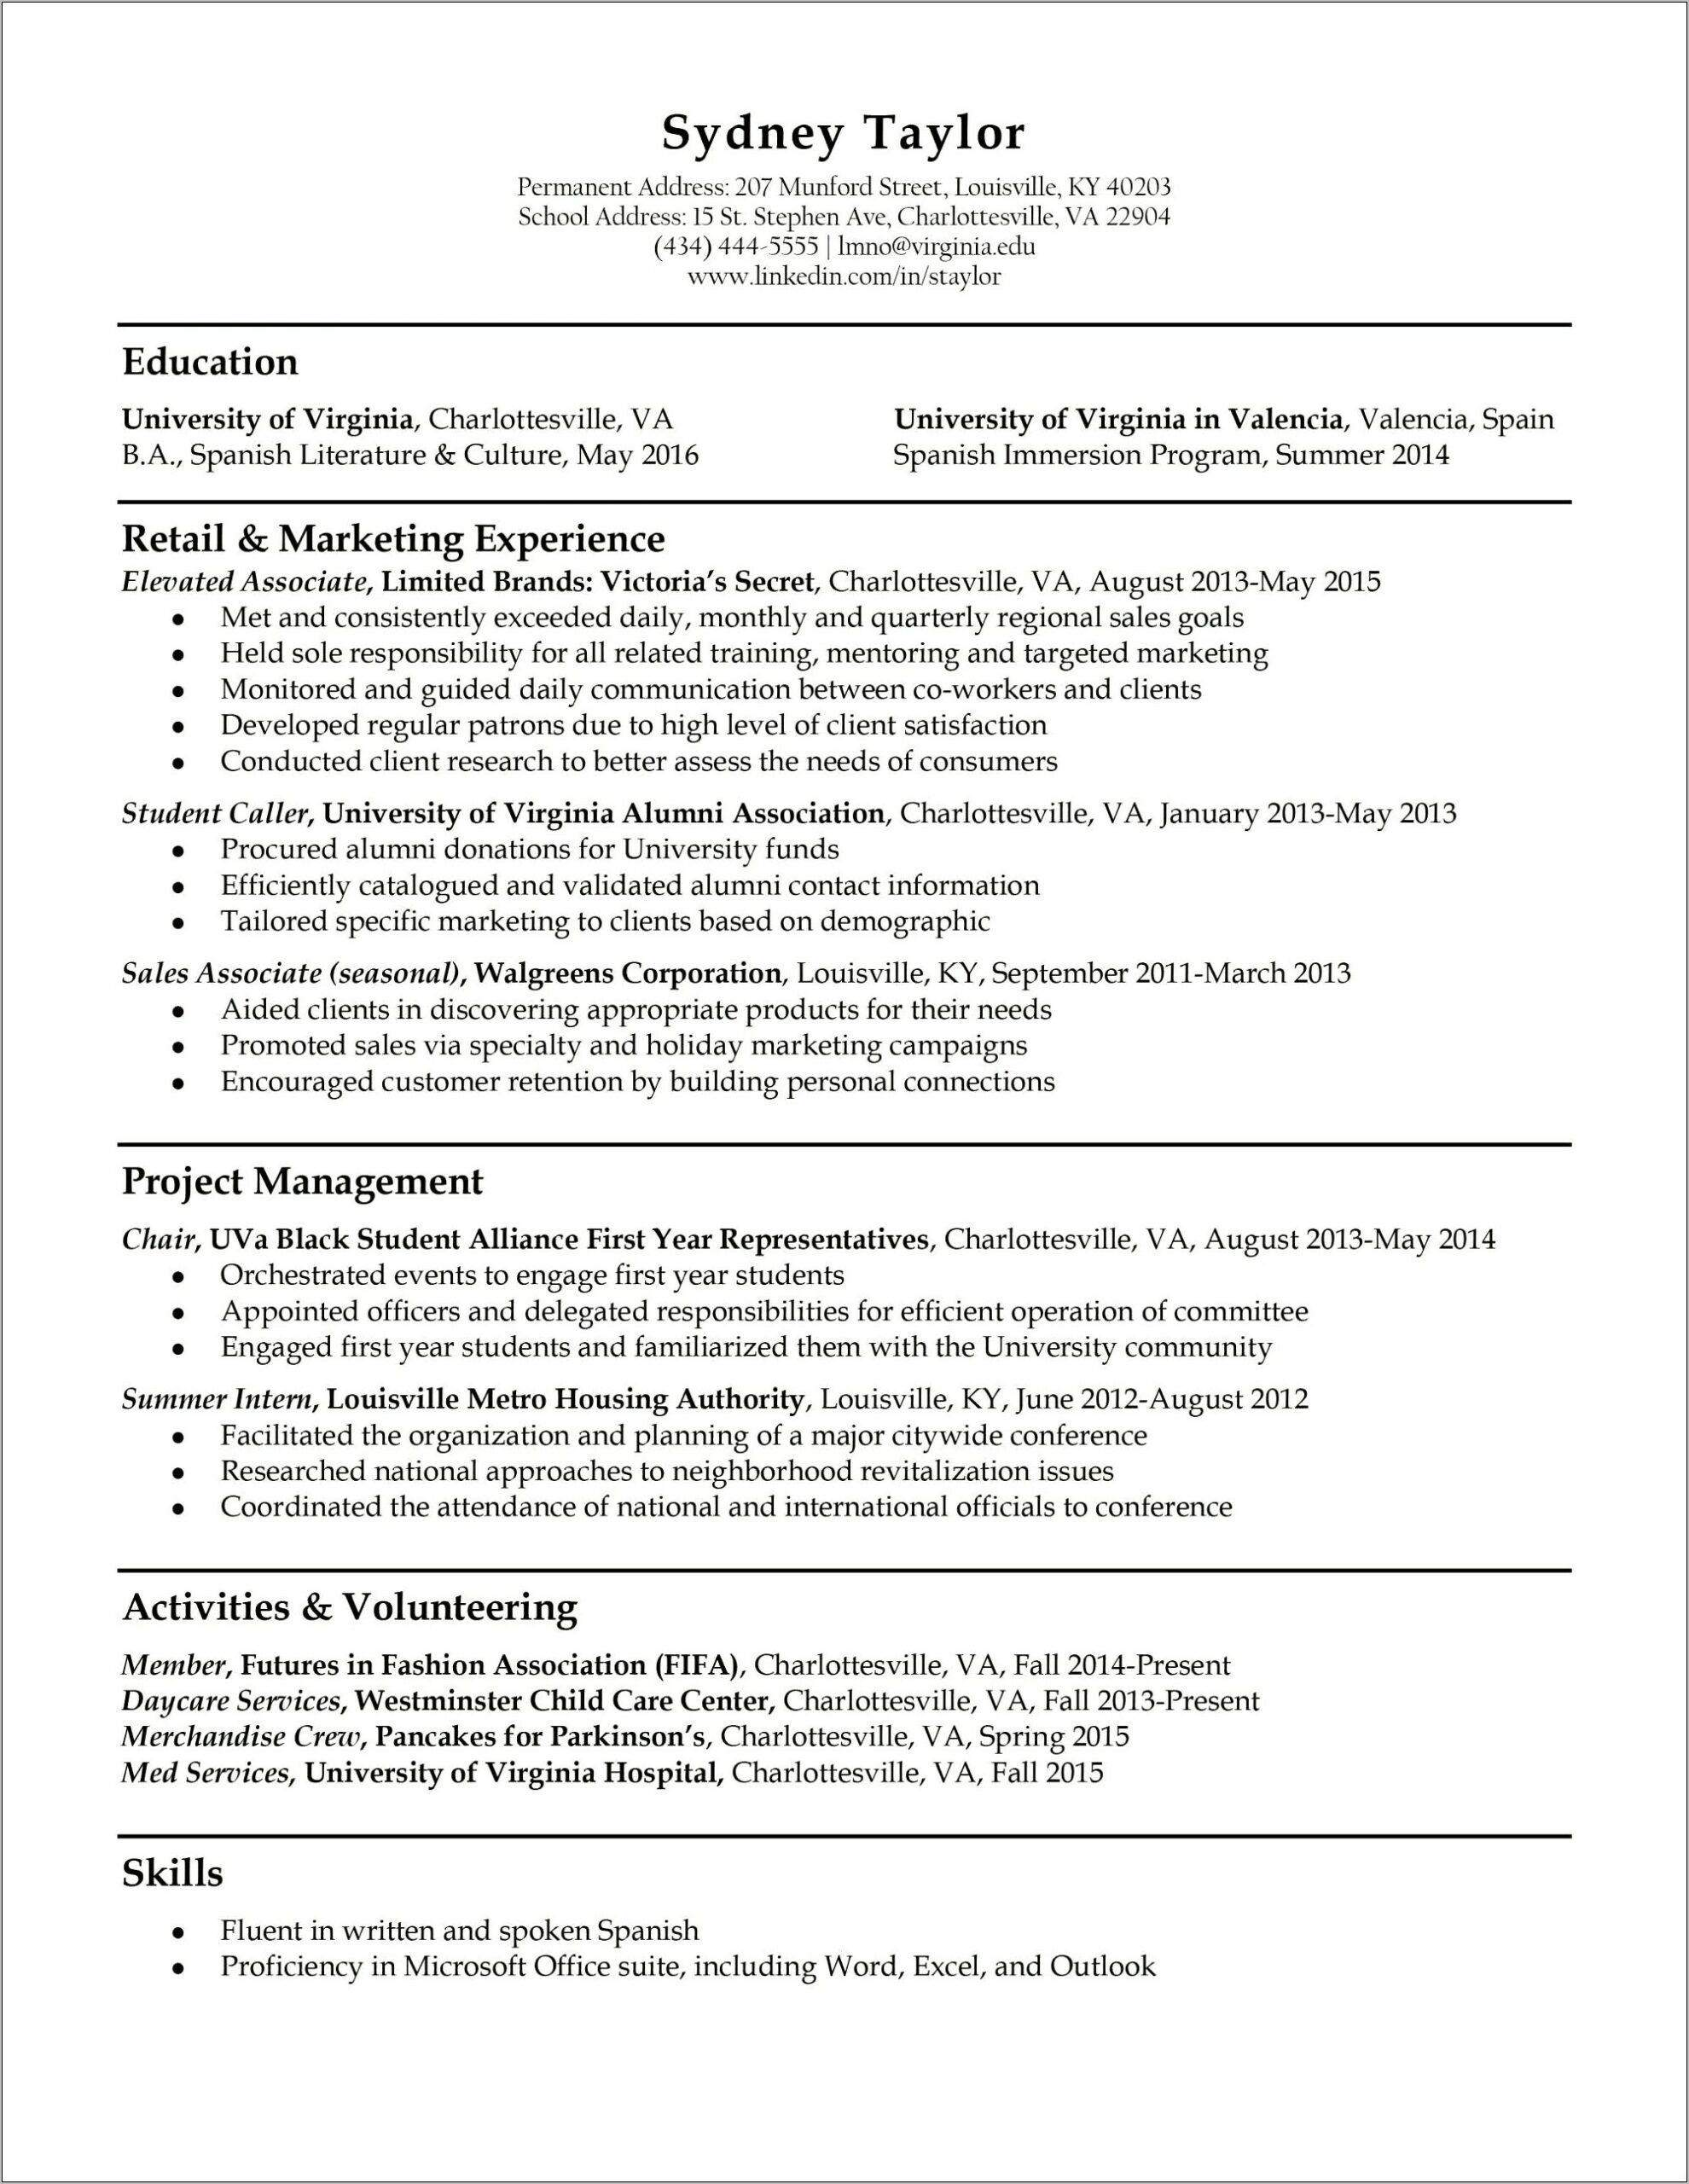 Example Of Resume For Medical School